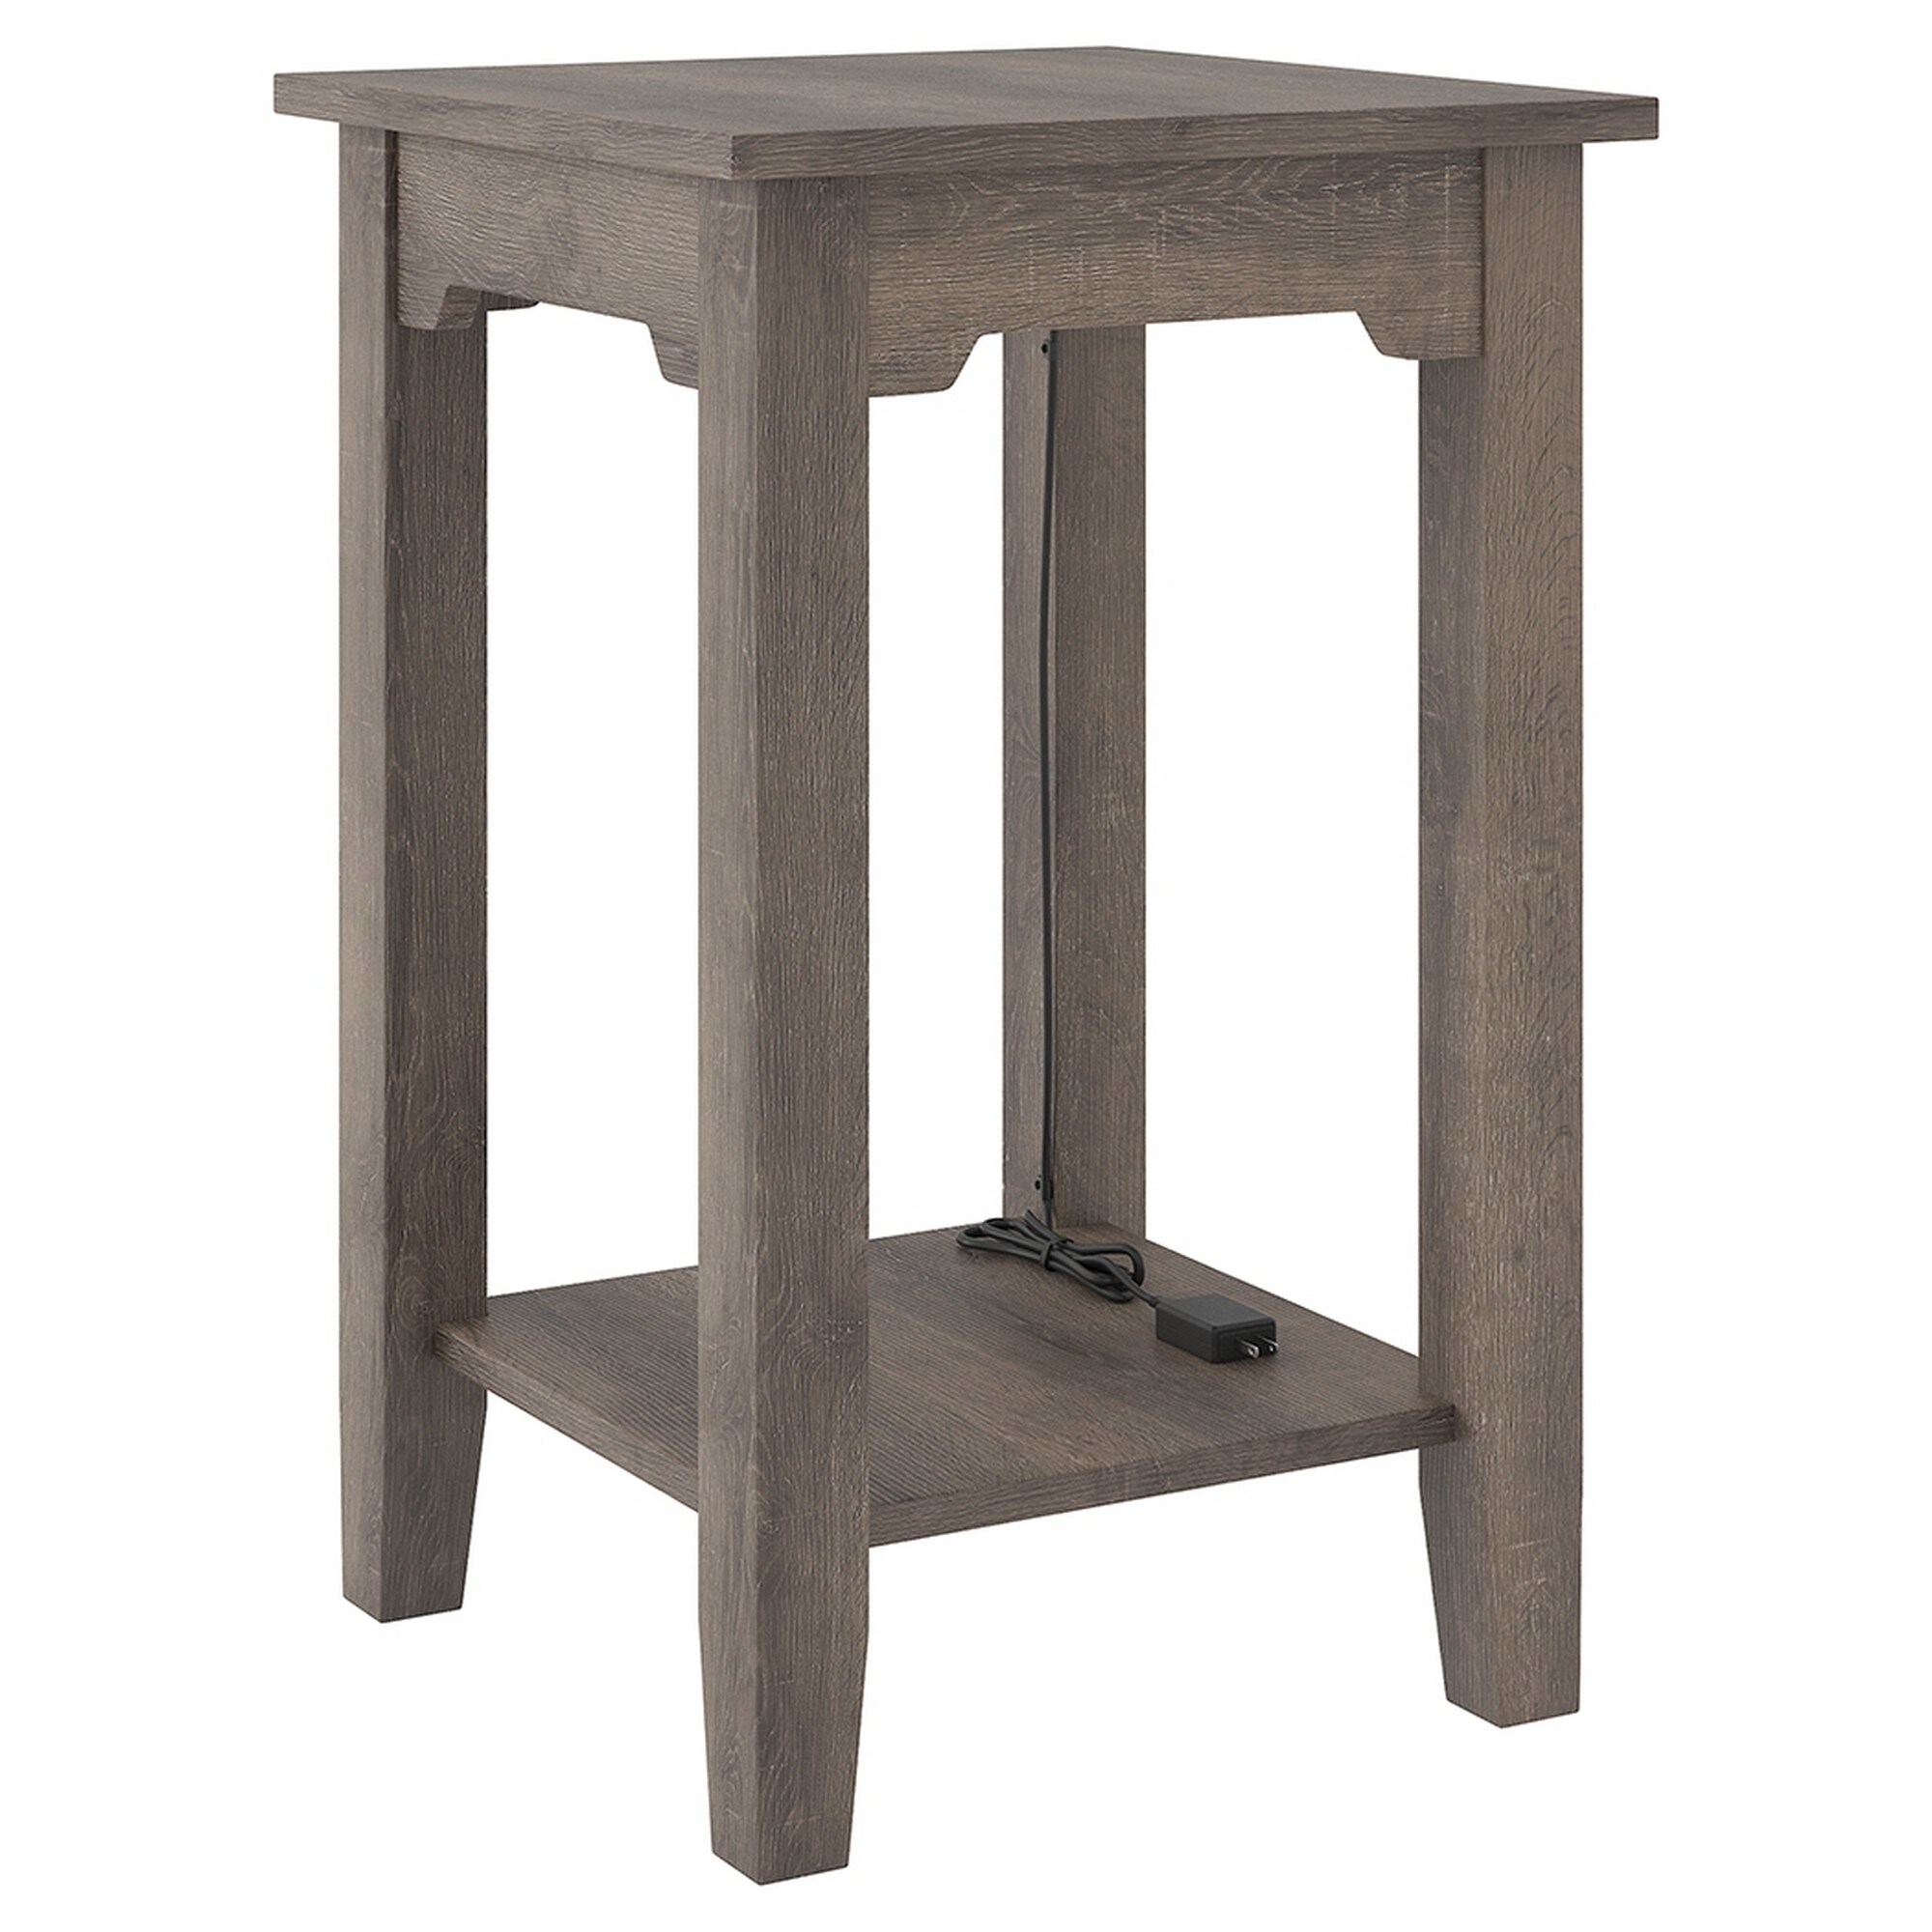 Benjara Wooden Side End Table with 2 USB Ports and Power Cord, Weathered Brown